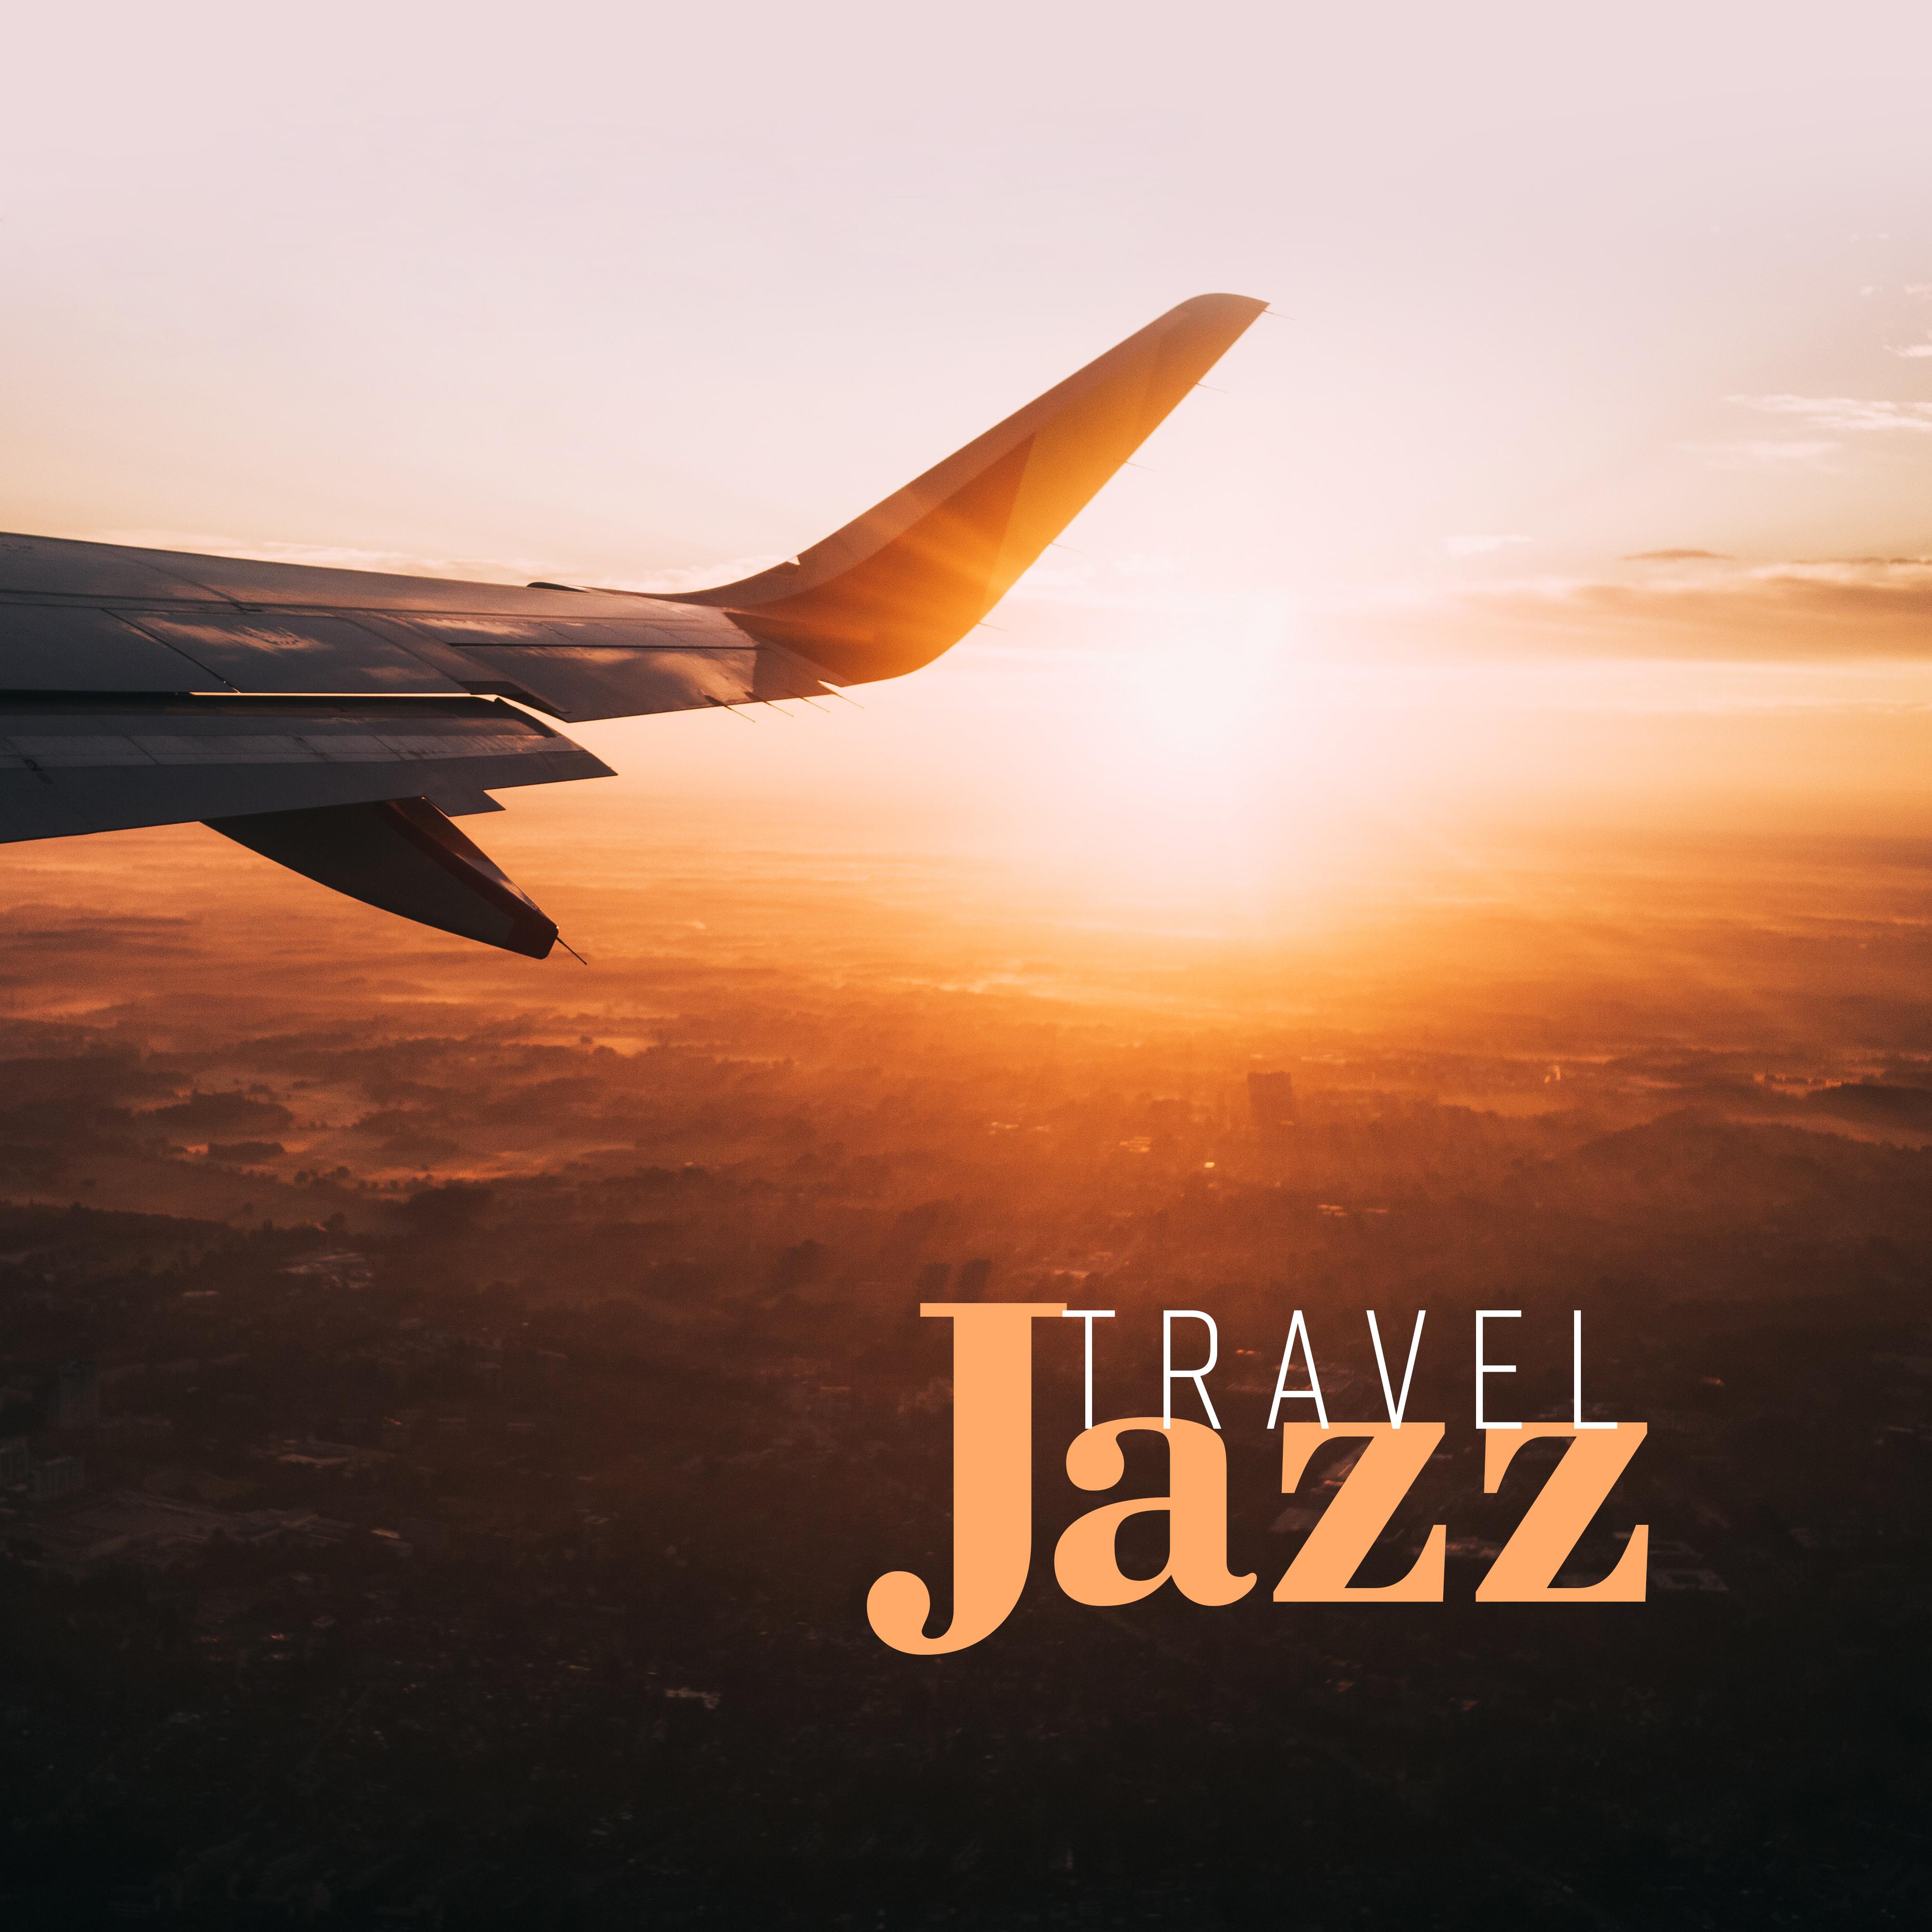 Travel Jazz: Music for a Trip